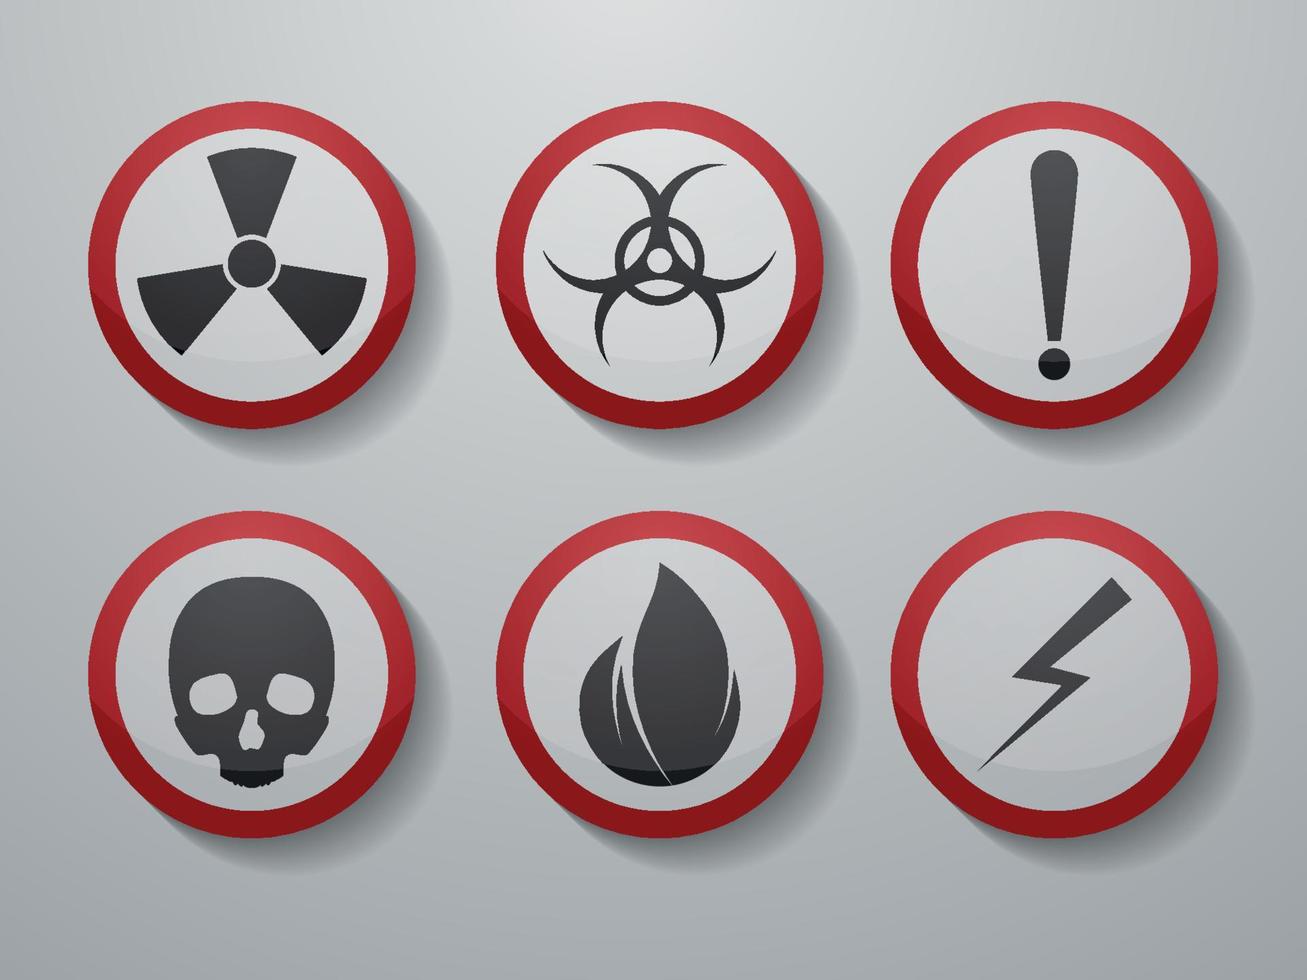 Illustration of warning signs in color with shadow vector